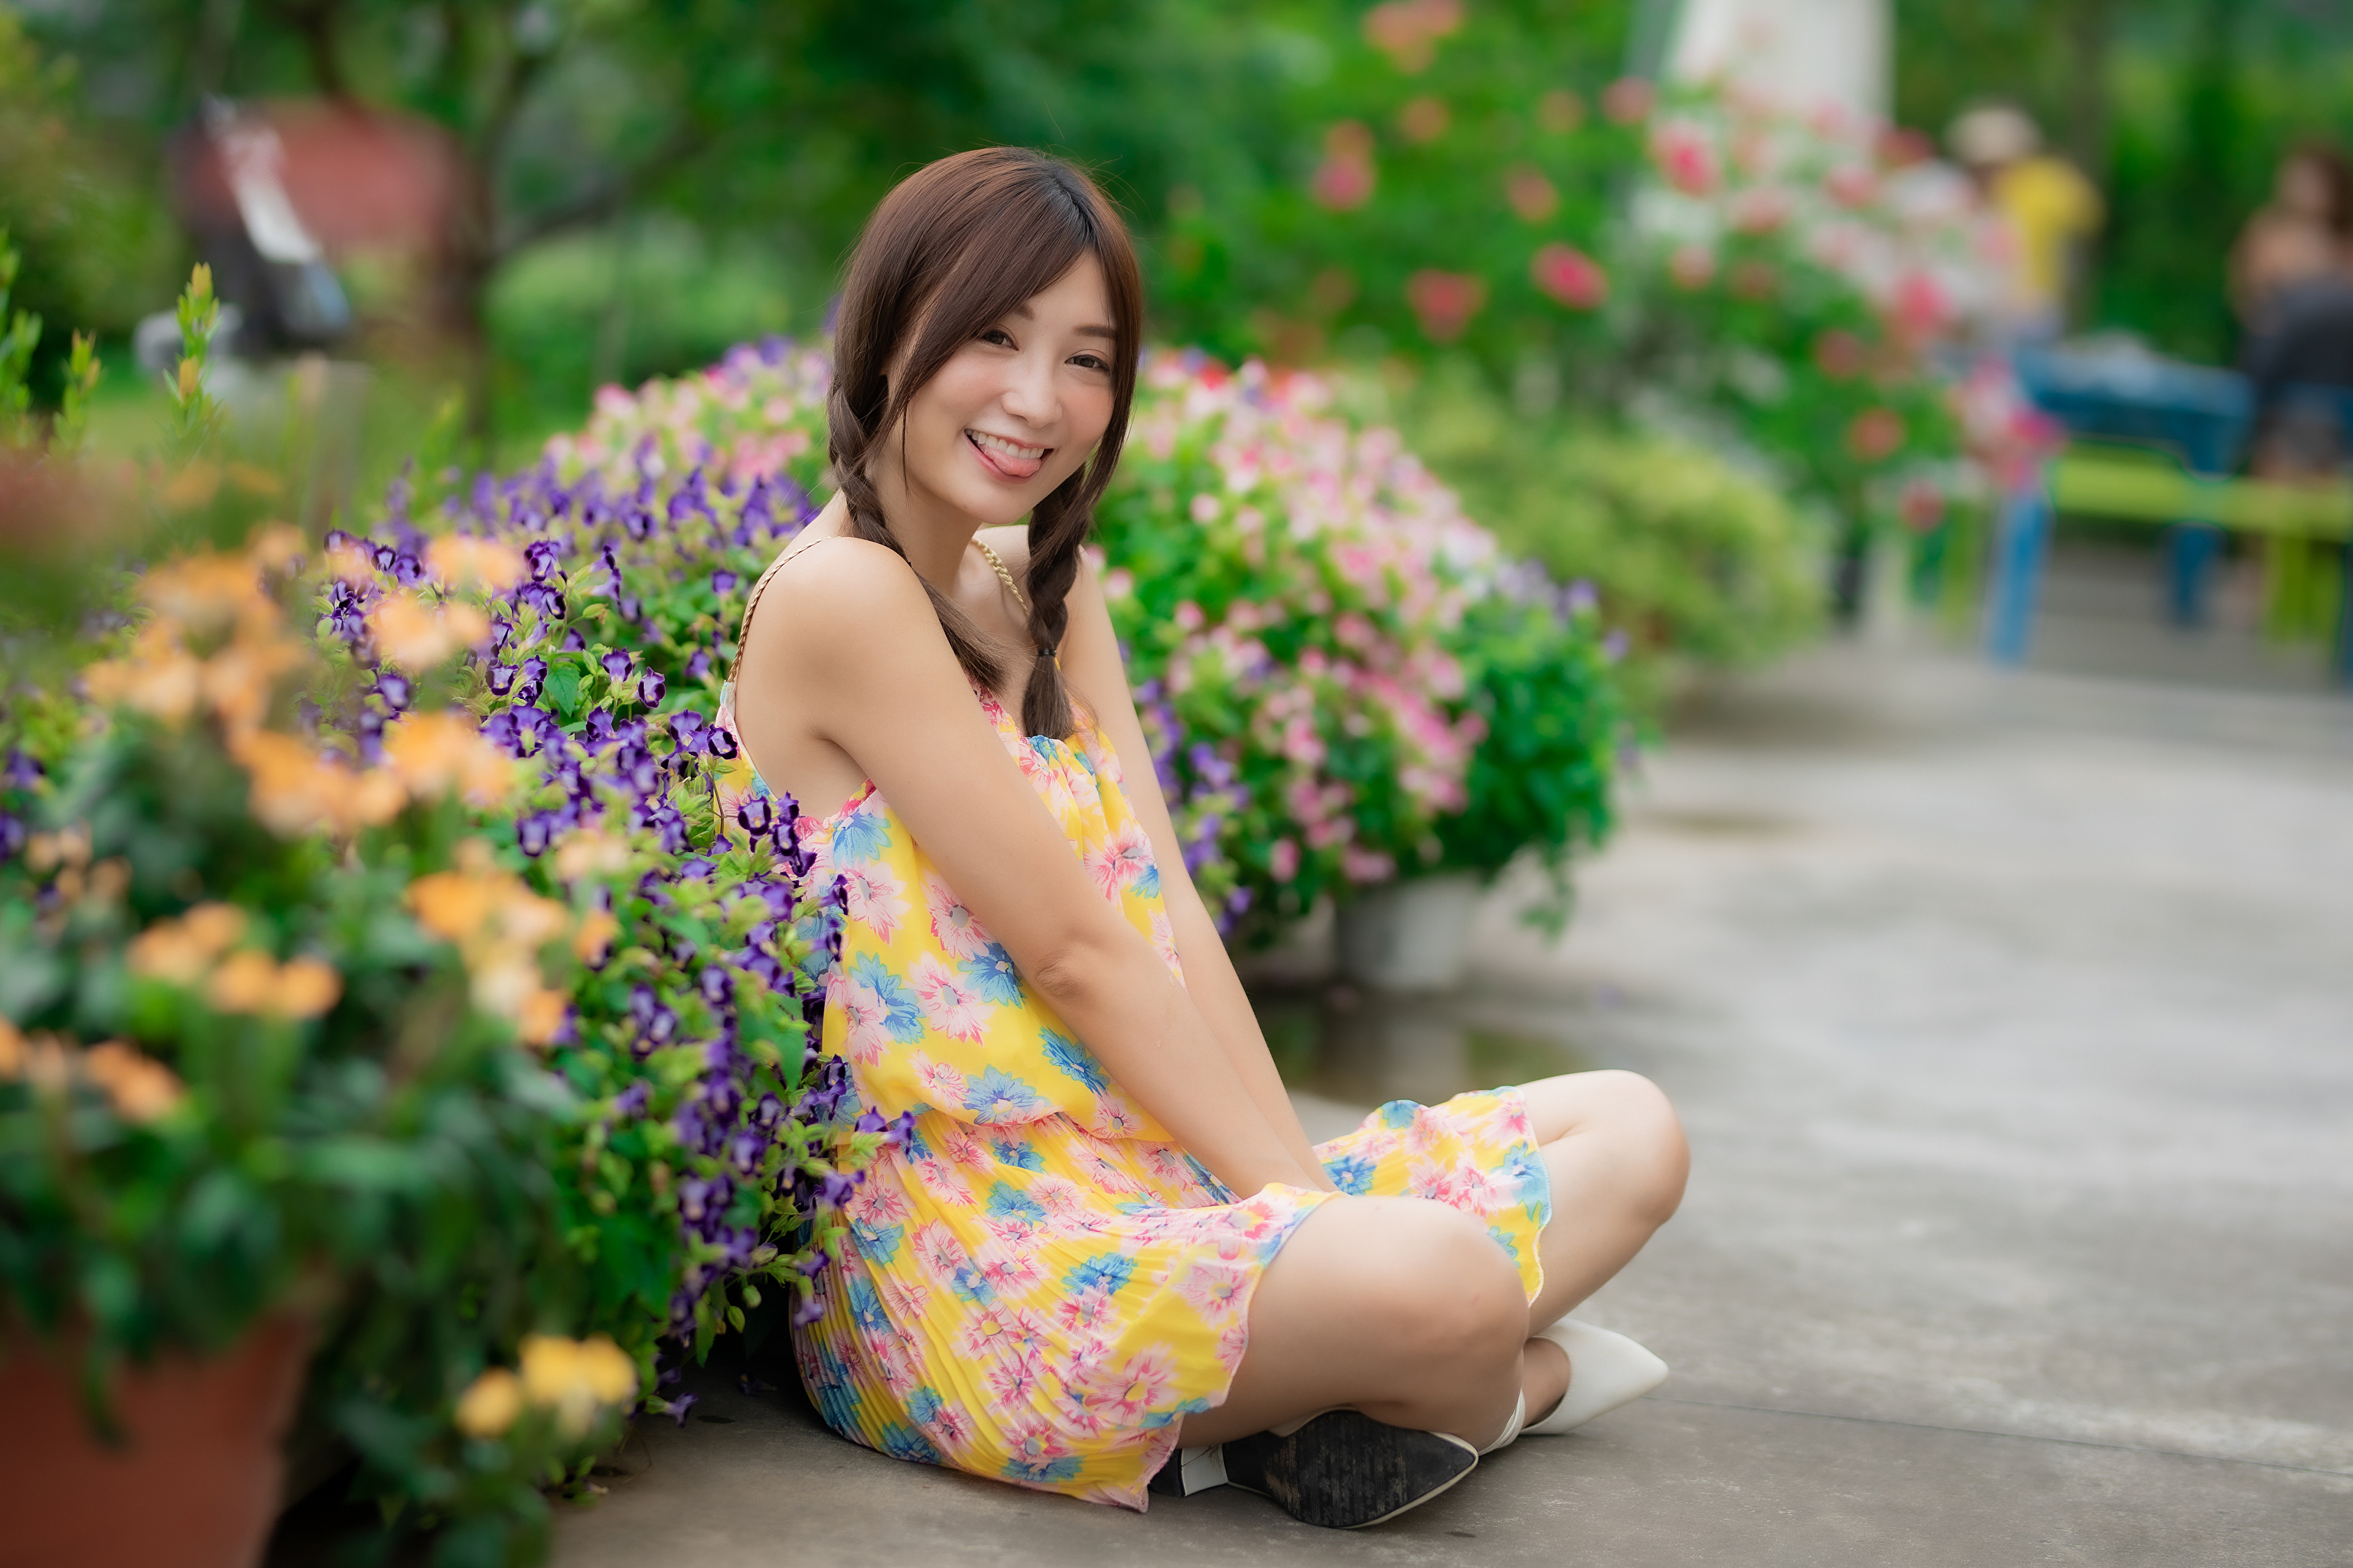 People 3840x2559 Asian model women long hair brunette depth of field twintails flowers flower dress sitting smiling colorful plants tongues tongue out legs crossed dress yellow dress urban